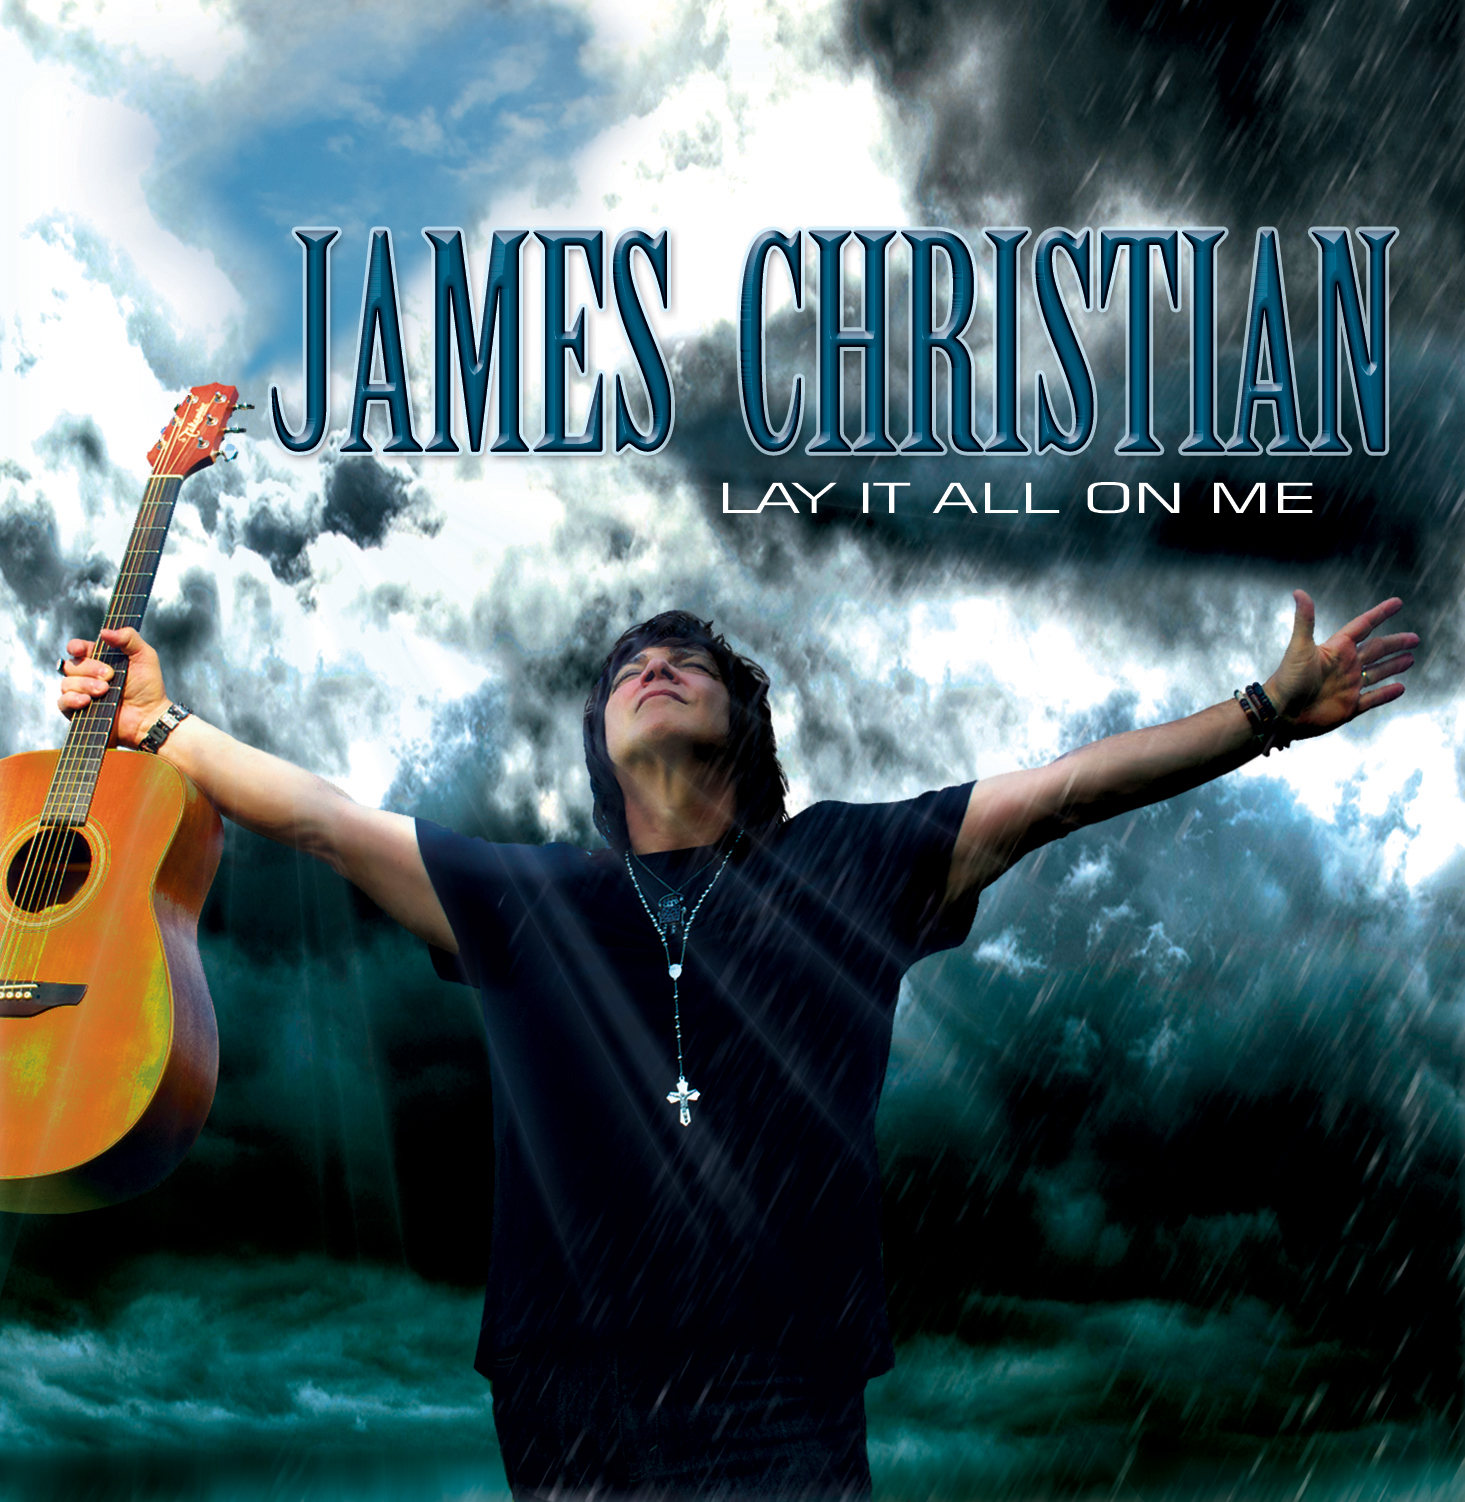 Lay it all on me – James Christian